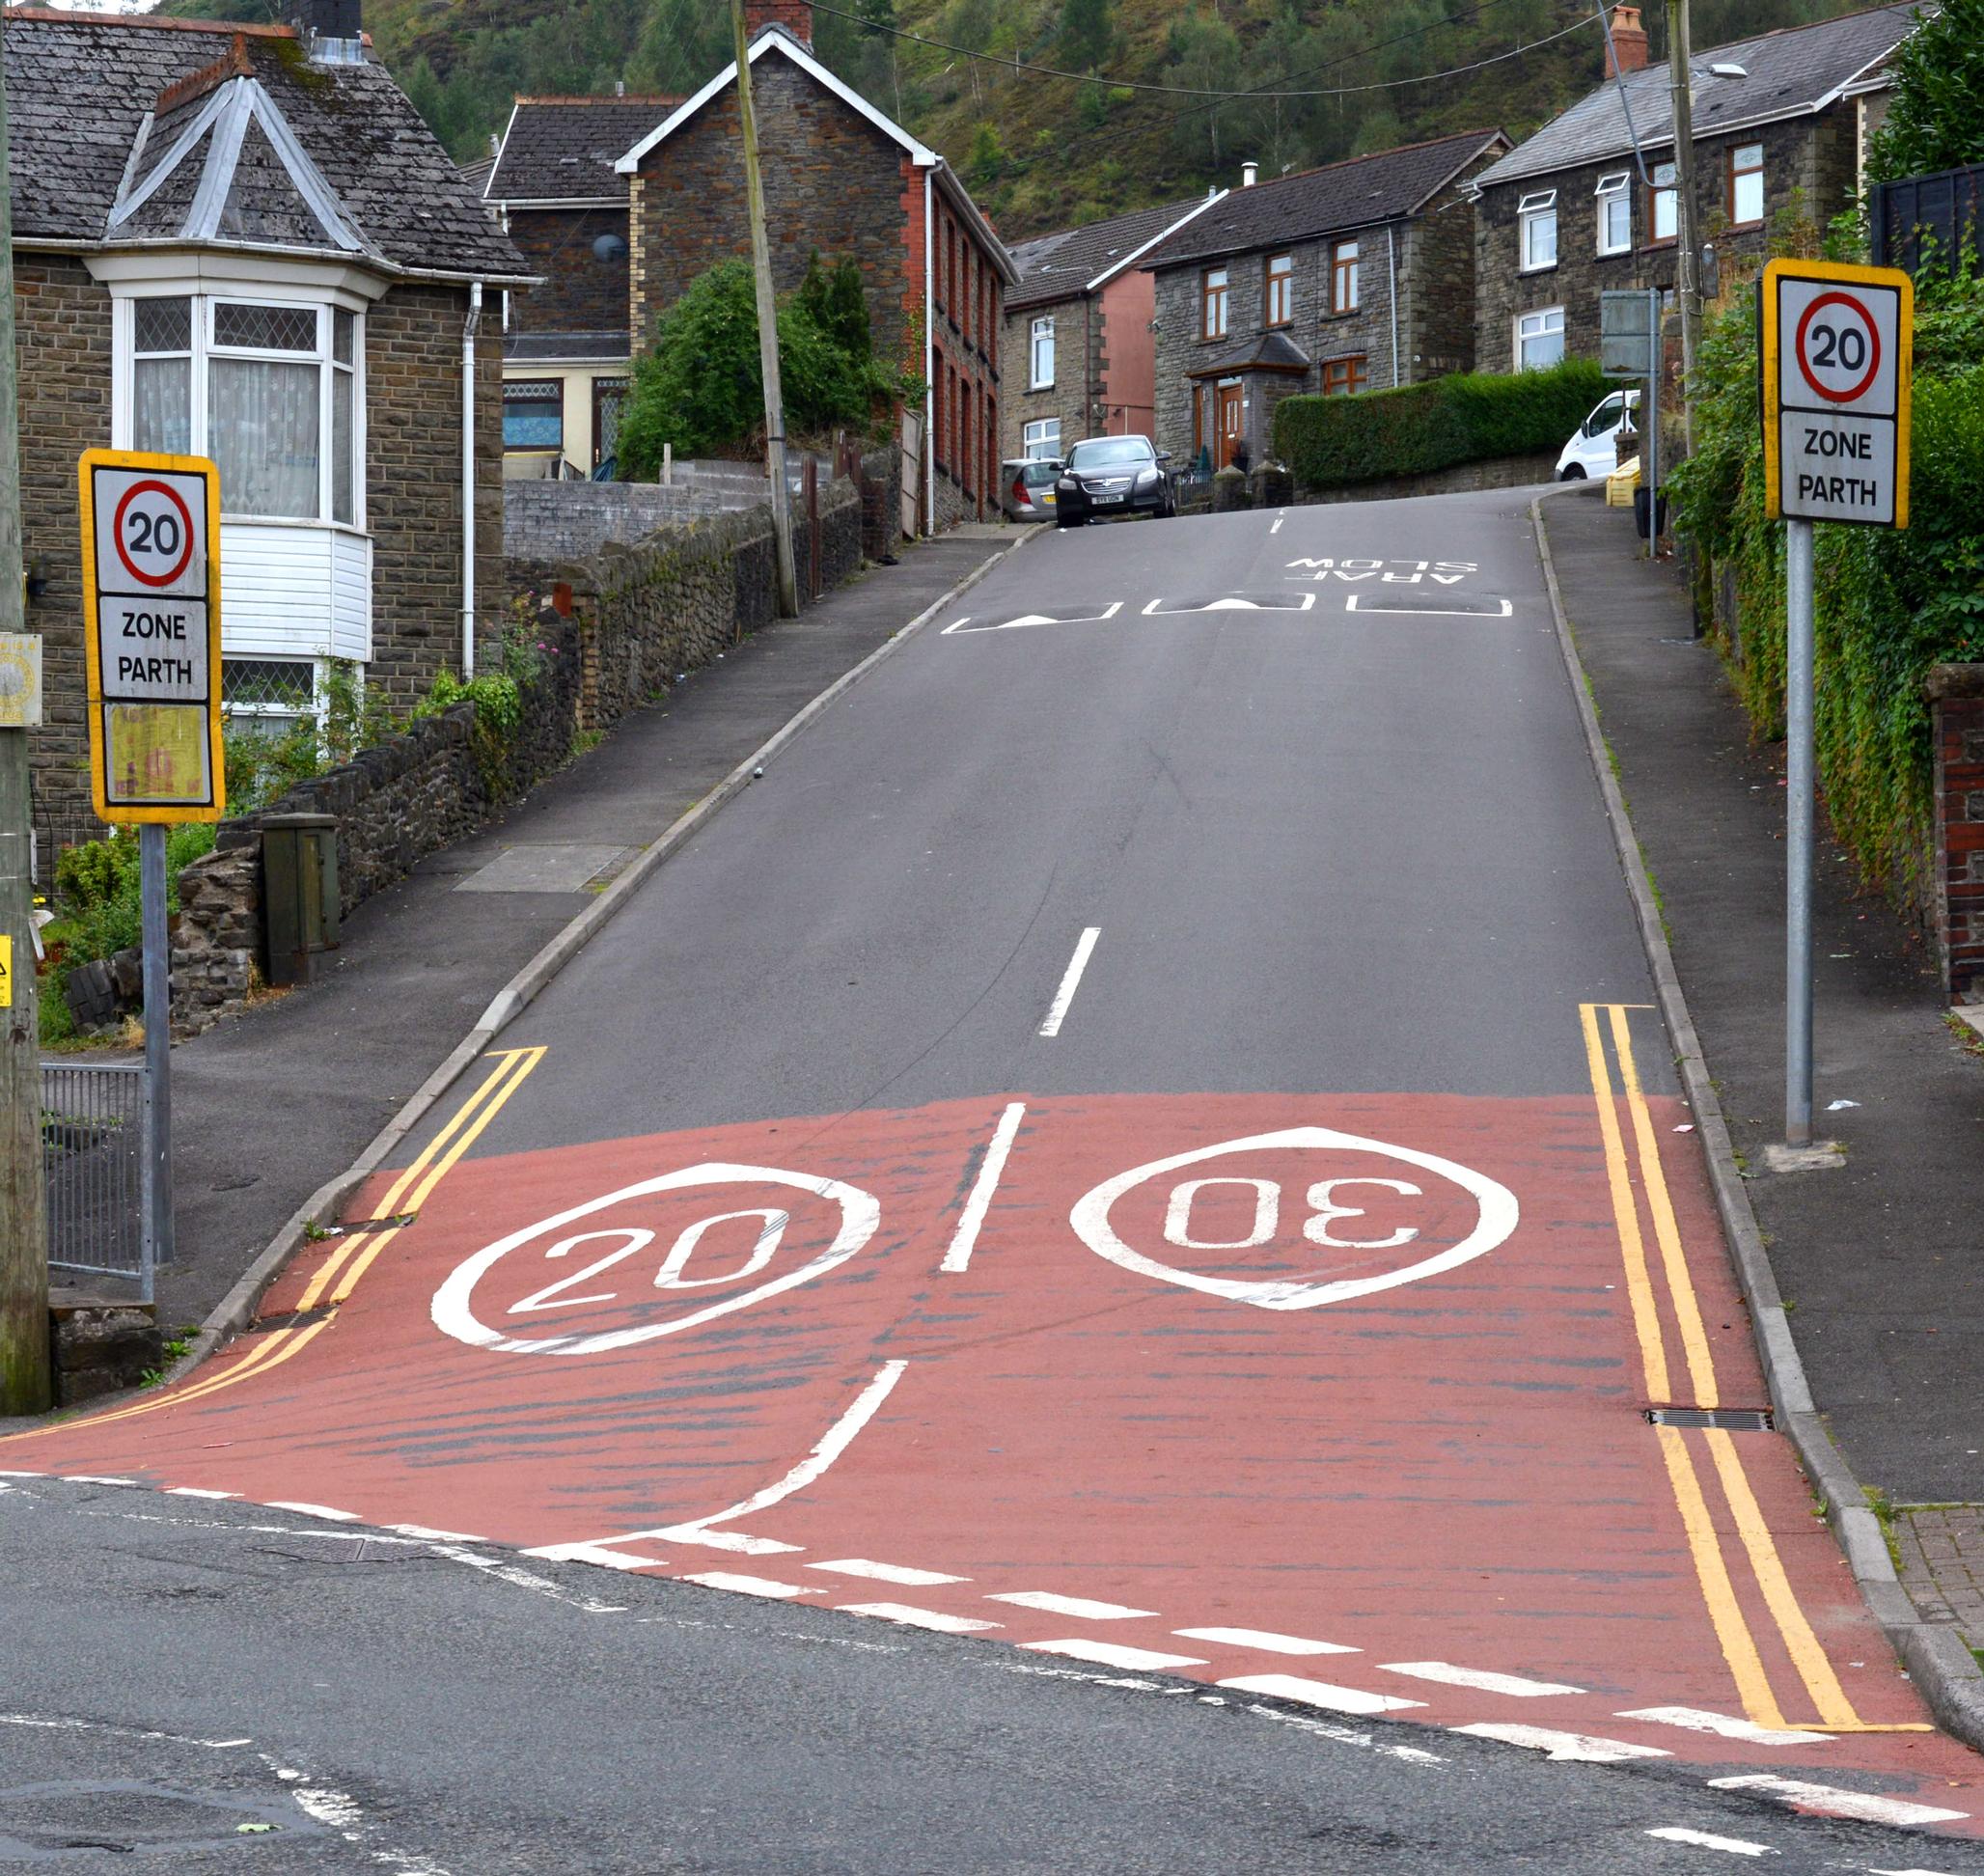 Carriageway speed limit markings in the Cynon Valley, pictured, have been removed ahead of 20mph becoming the default limit in September.